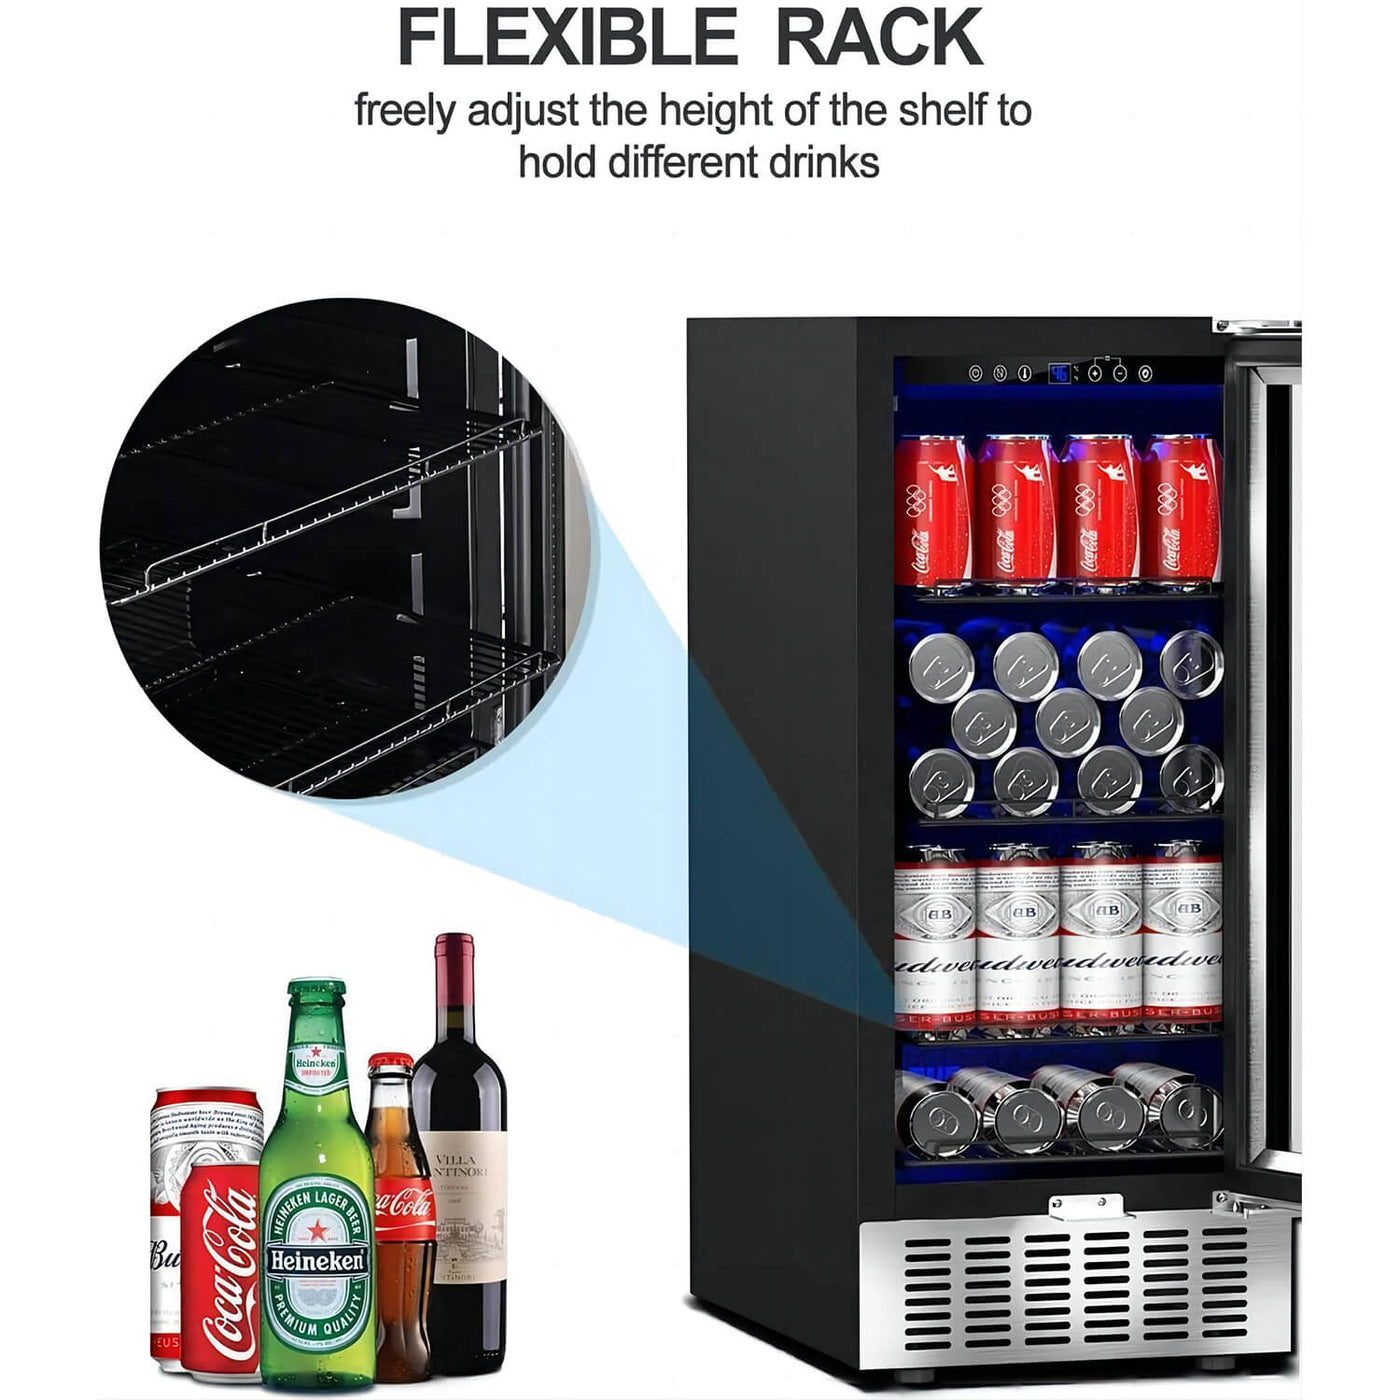 AOBOSI 15 inch Beverage Refrigerator 94 Cans